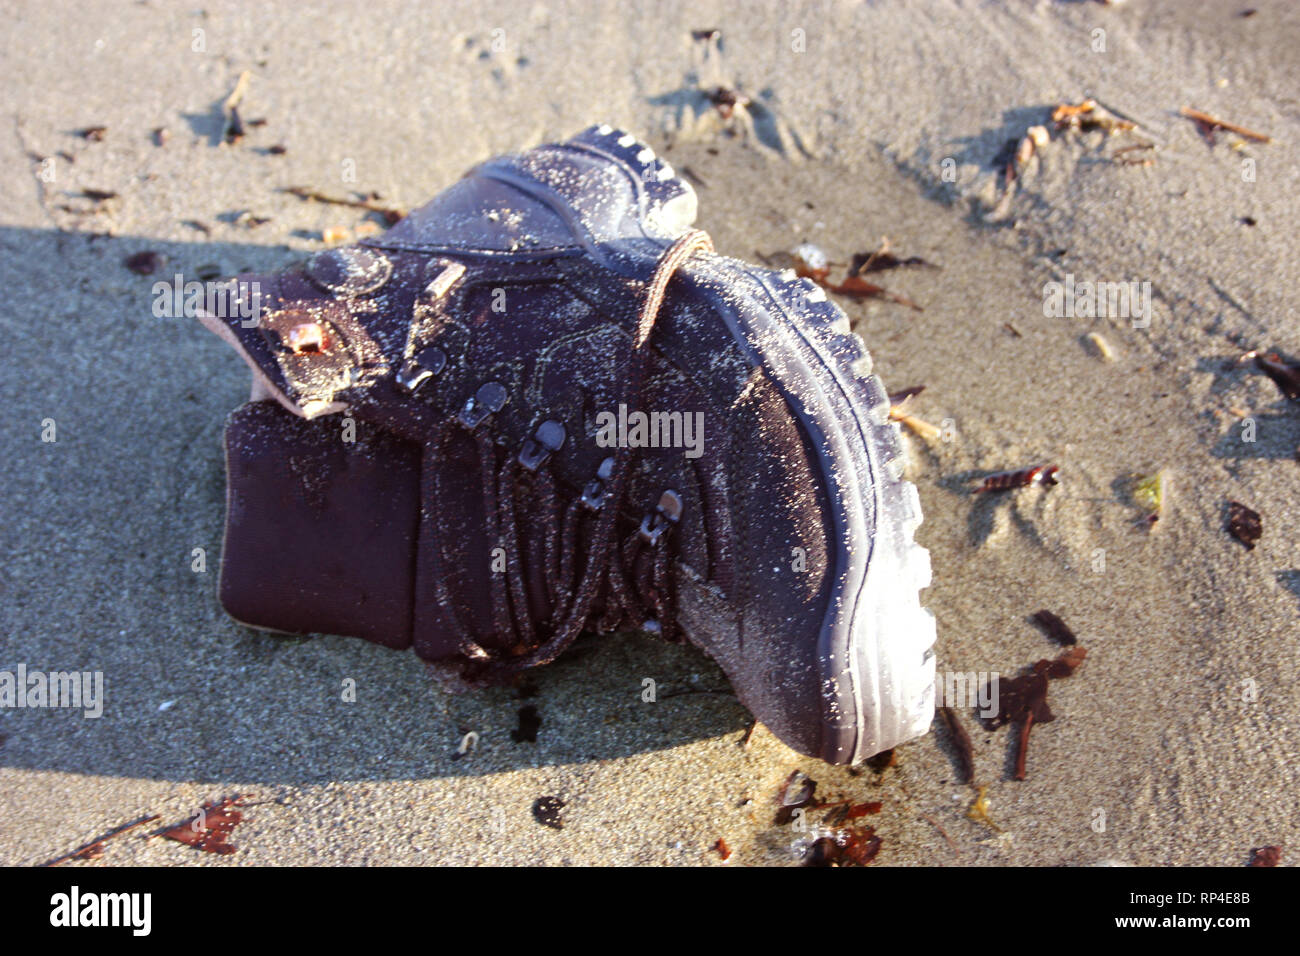 Abandoned Shoe High Resolution Stock Photography and Images - Alamy